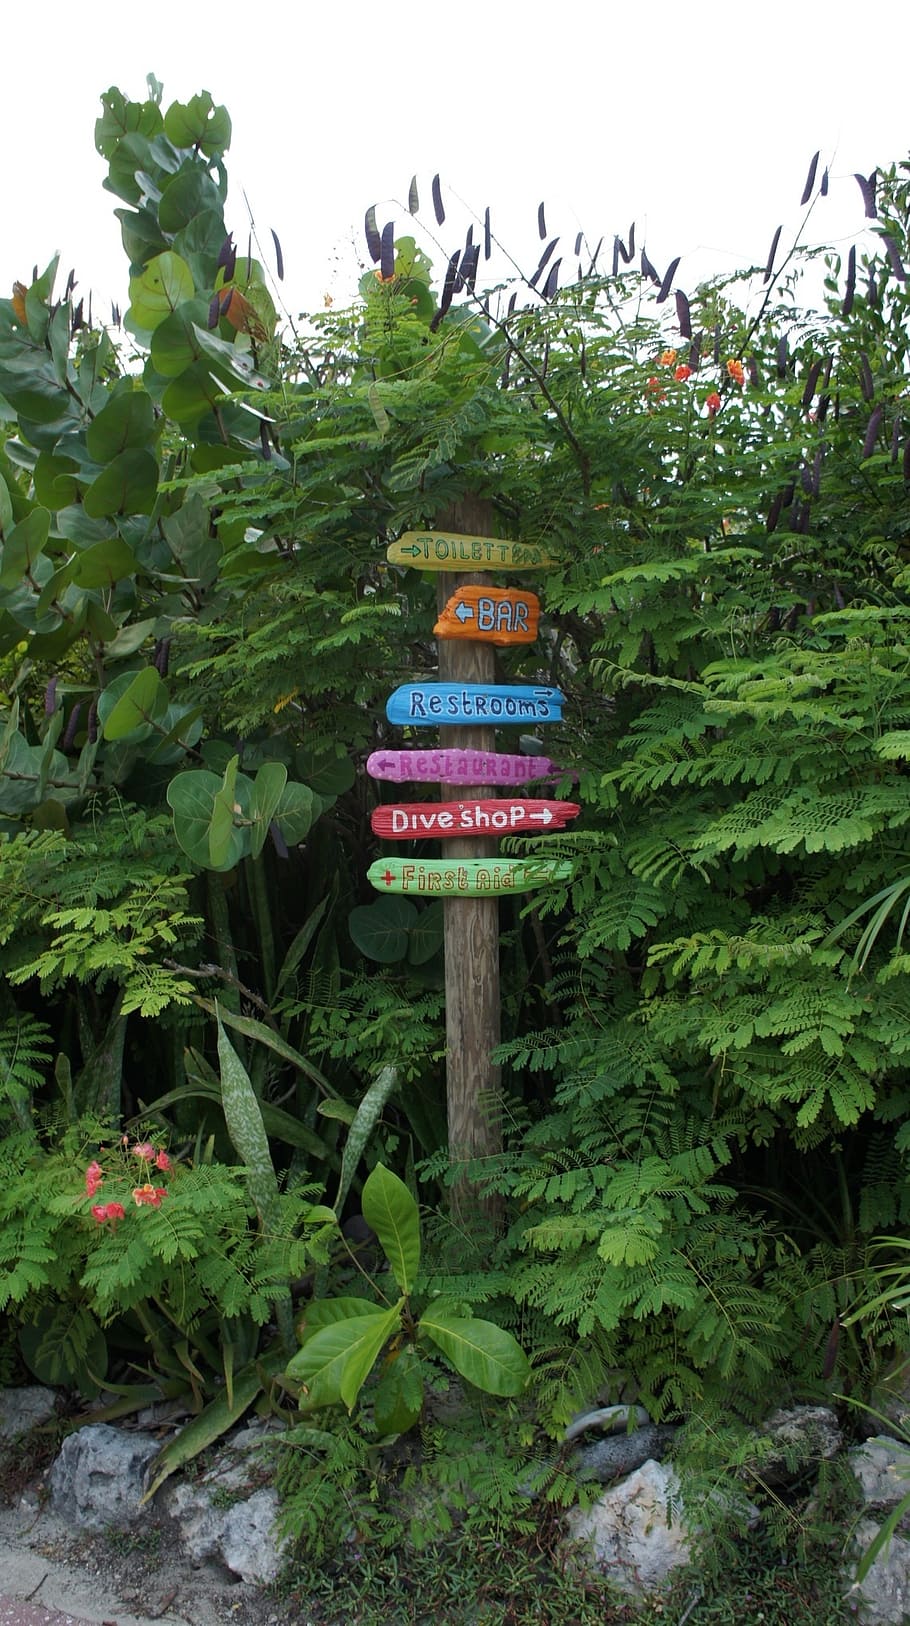 directory, waymarks, arrow, to find, abc islands, curacao, caribbean, netherlands antilles, plant, nature